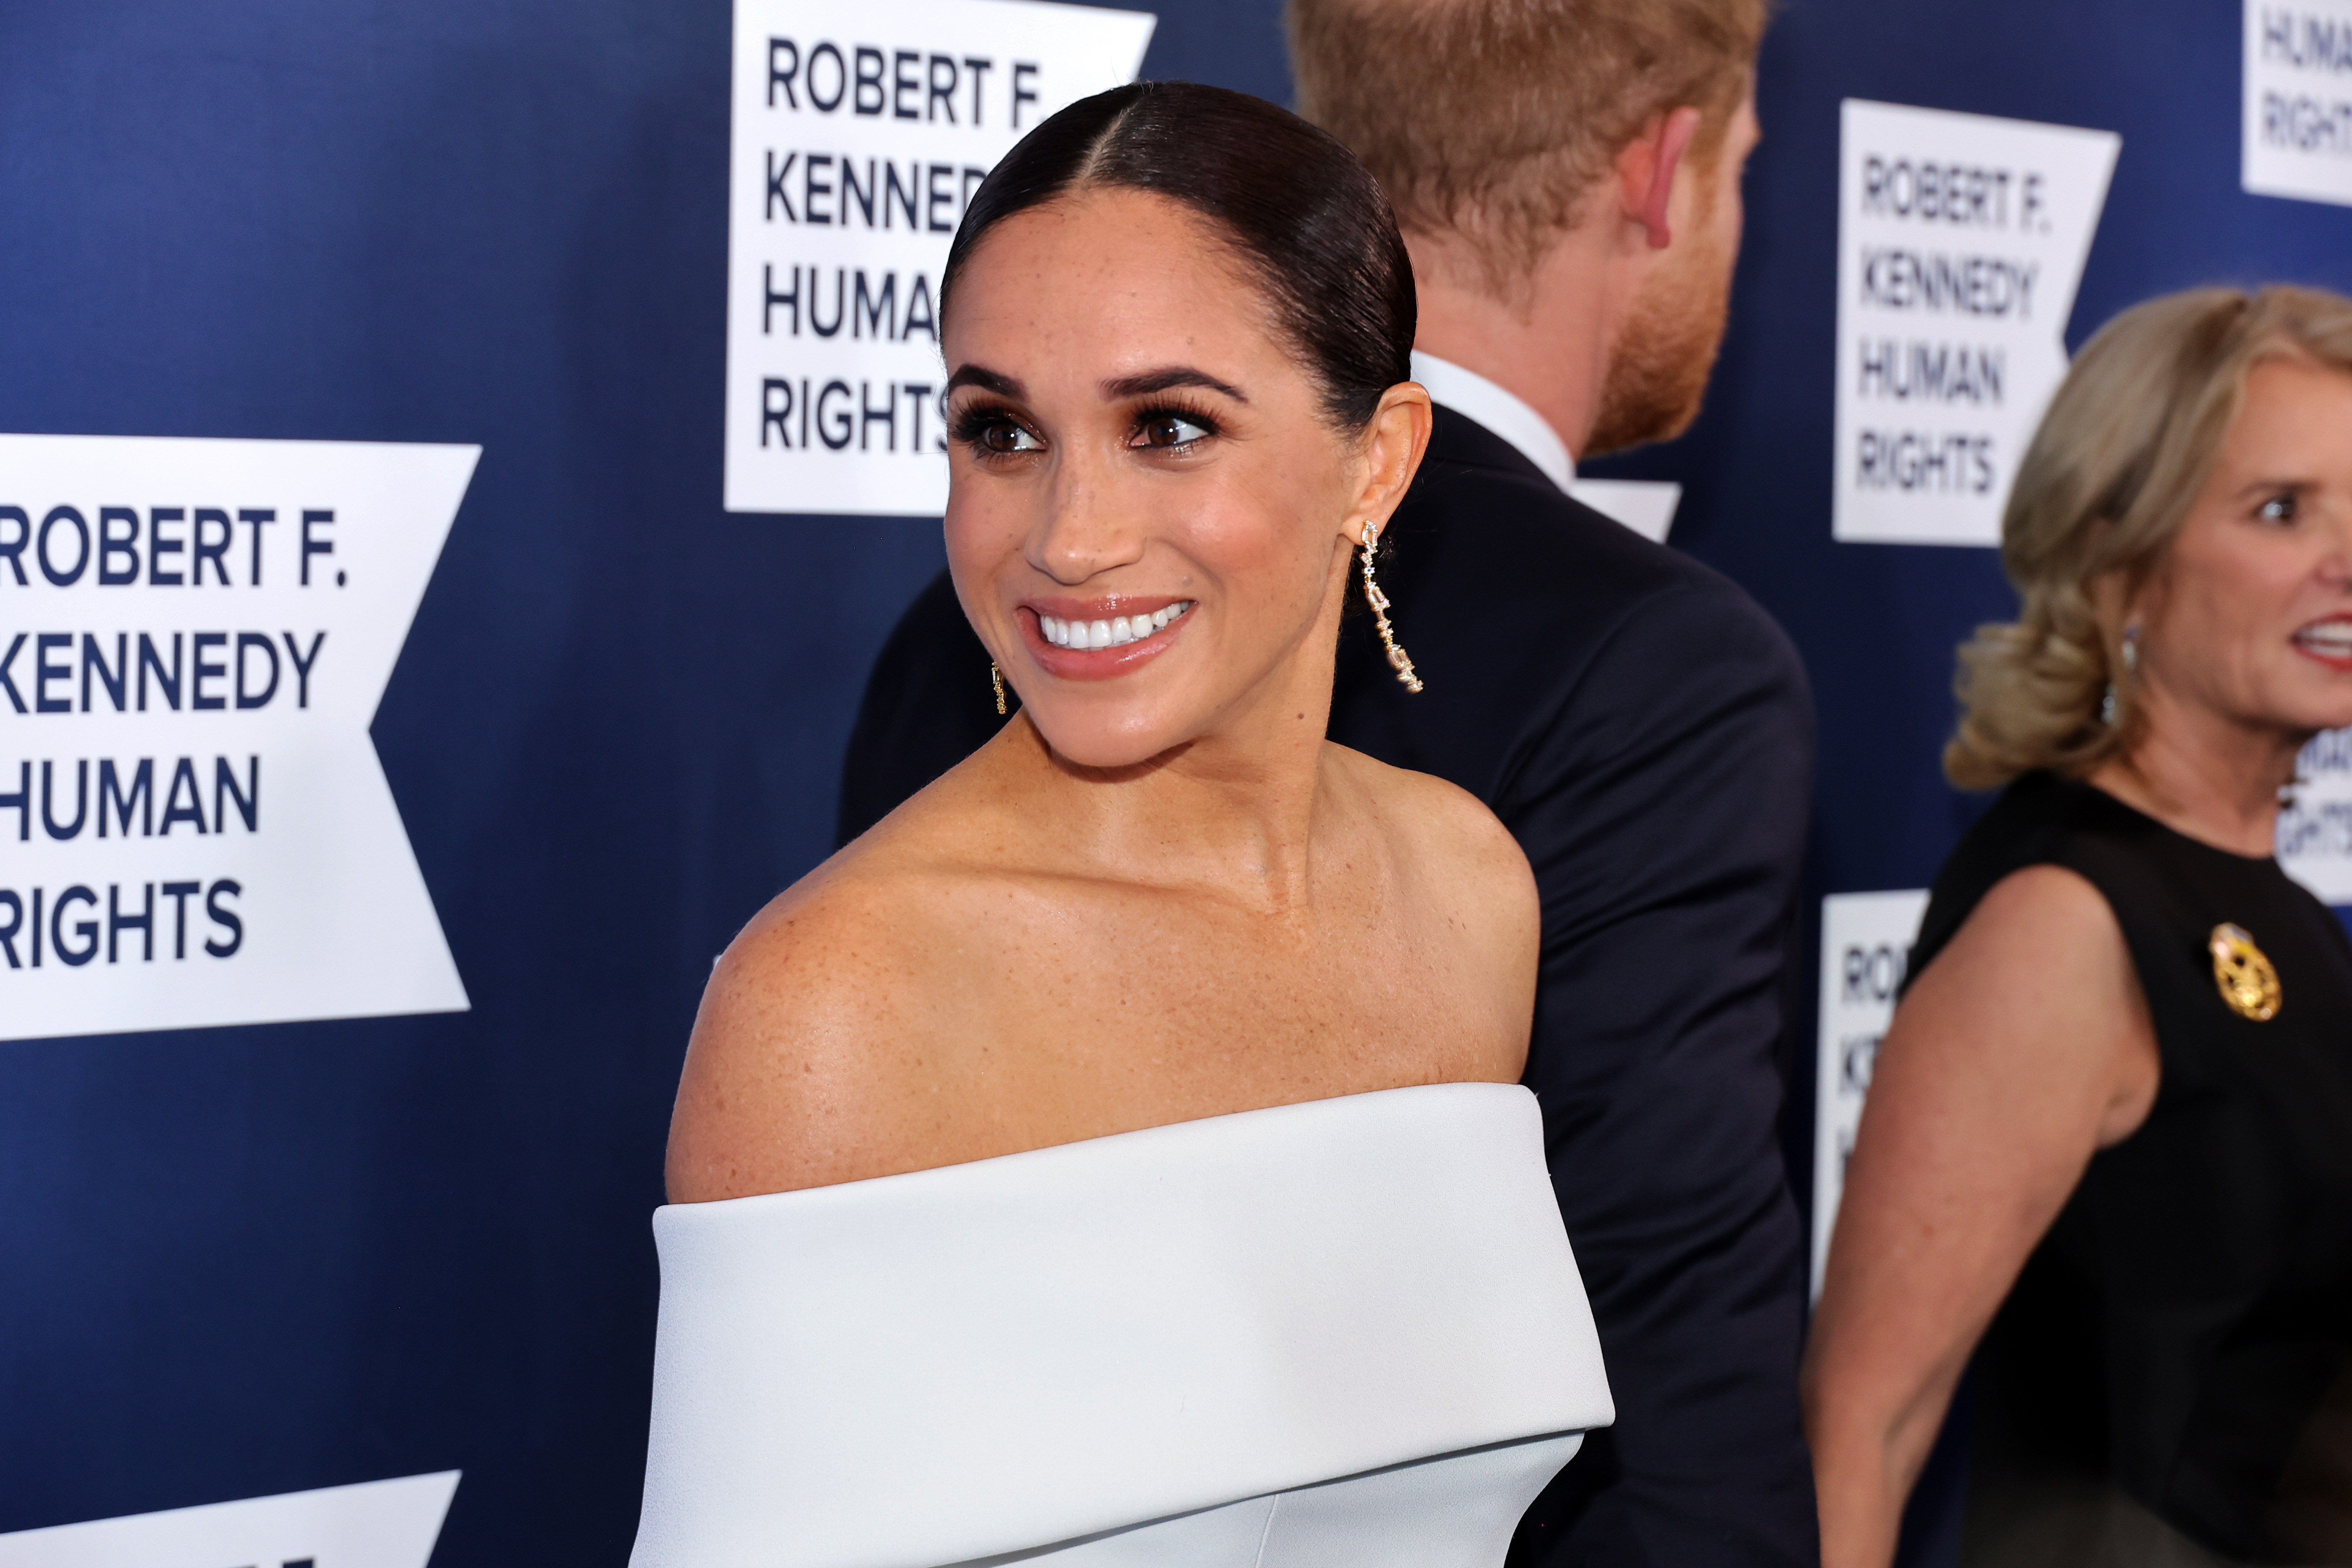 Meghan, Duchess of Sussex attends the 2022 Robert F. Kennedy Human Rights Ripple of Hope Gala at New York Hilton on December 06, 2022 in New York City. | Source: Getty Images